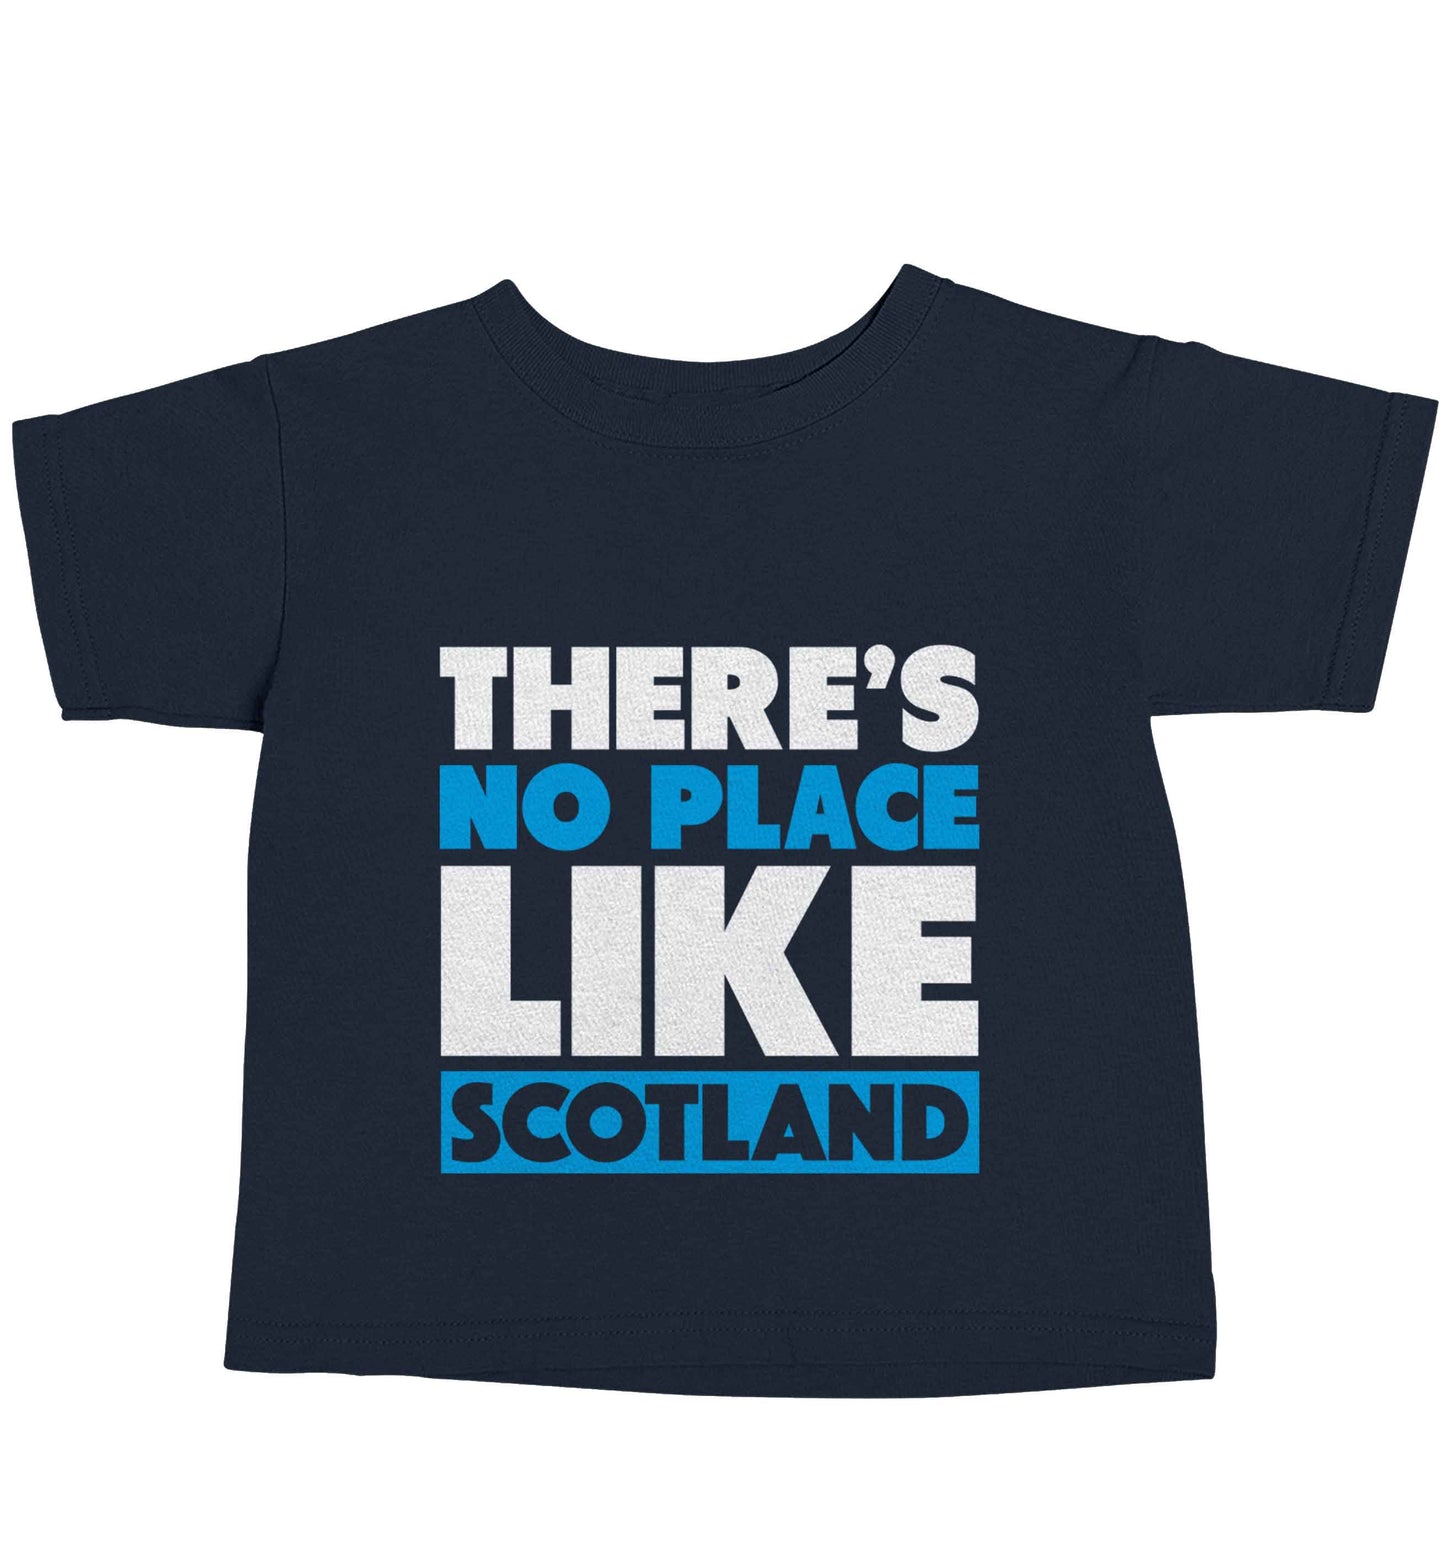 There's no place like Scotland navy baby toddler Tshirt 2 Years